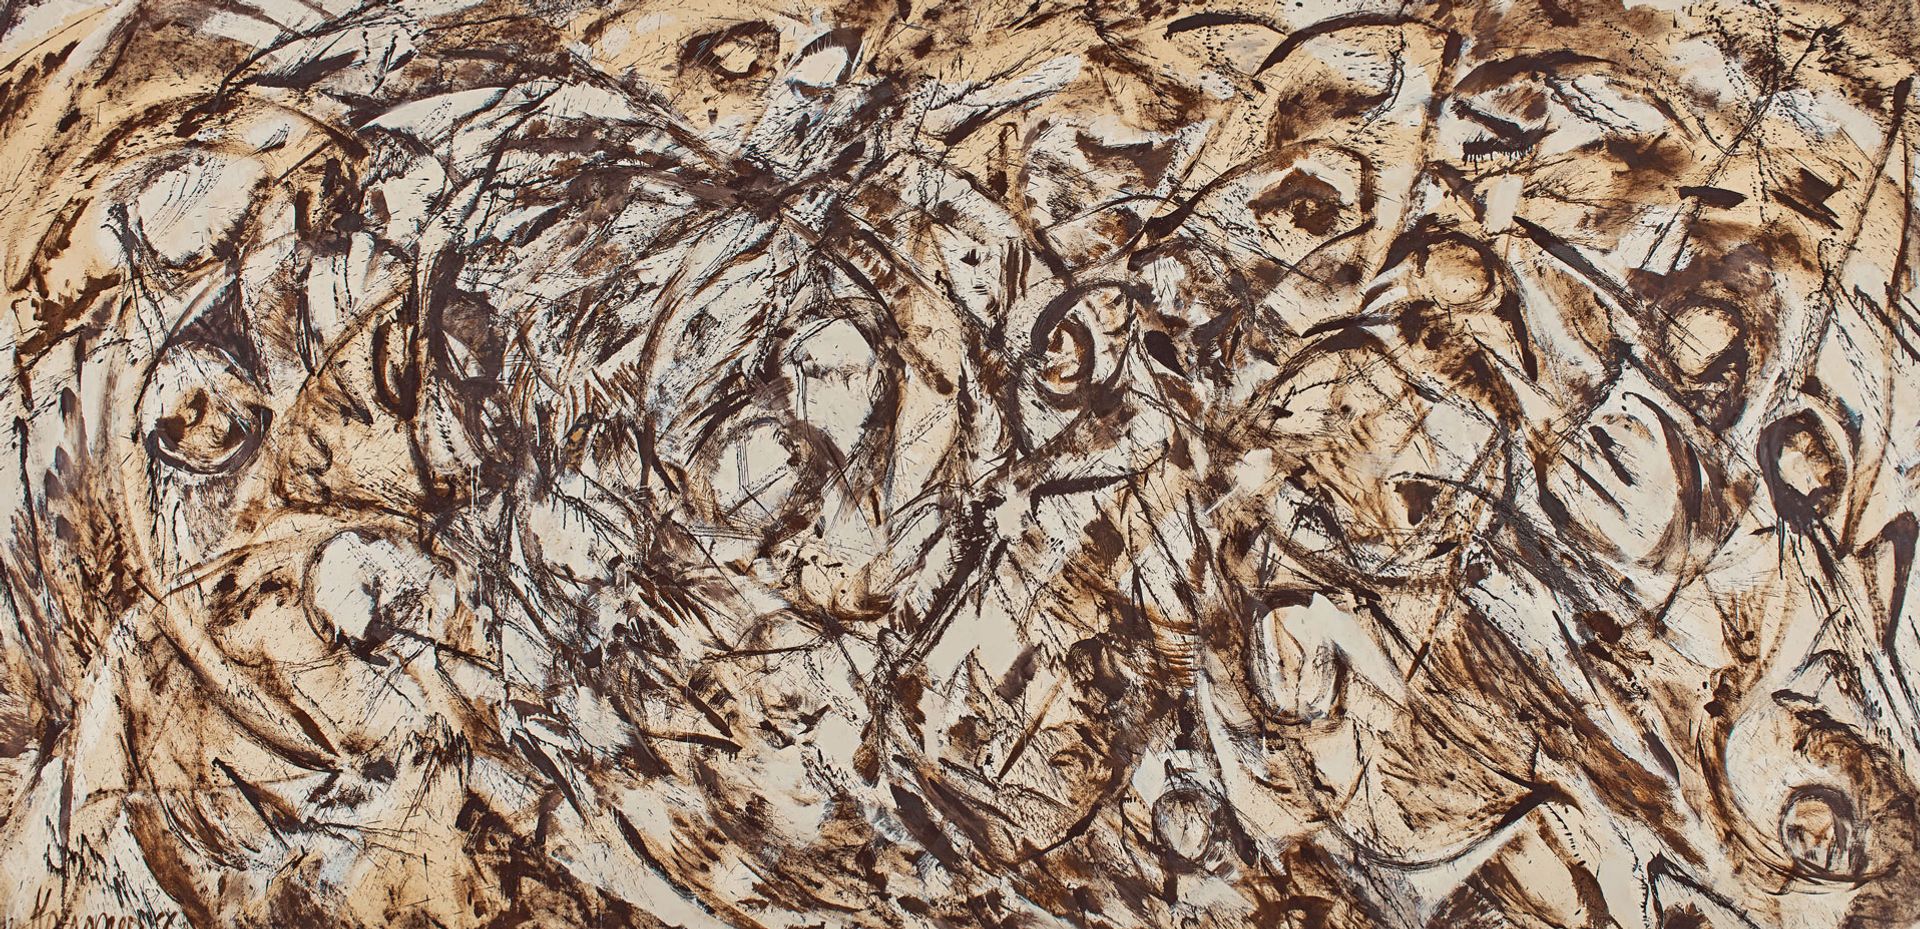 Lee Krasner's The Eye is the First Circle (1960) © Pollock-Krasner Foundation/Artists Rights Society; courtesy of Sotheby’s